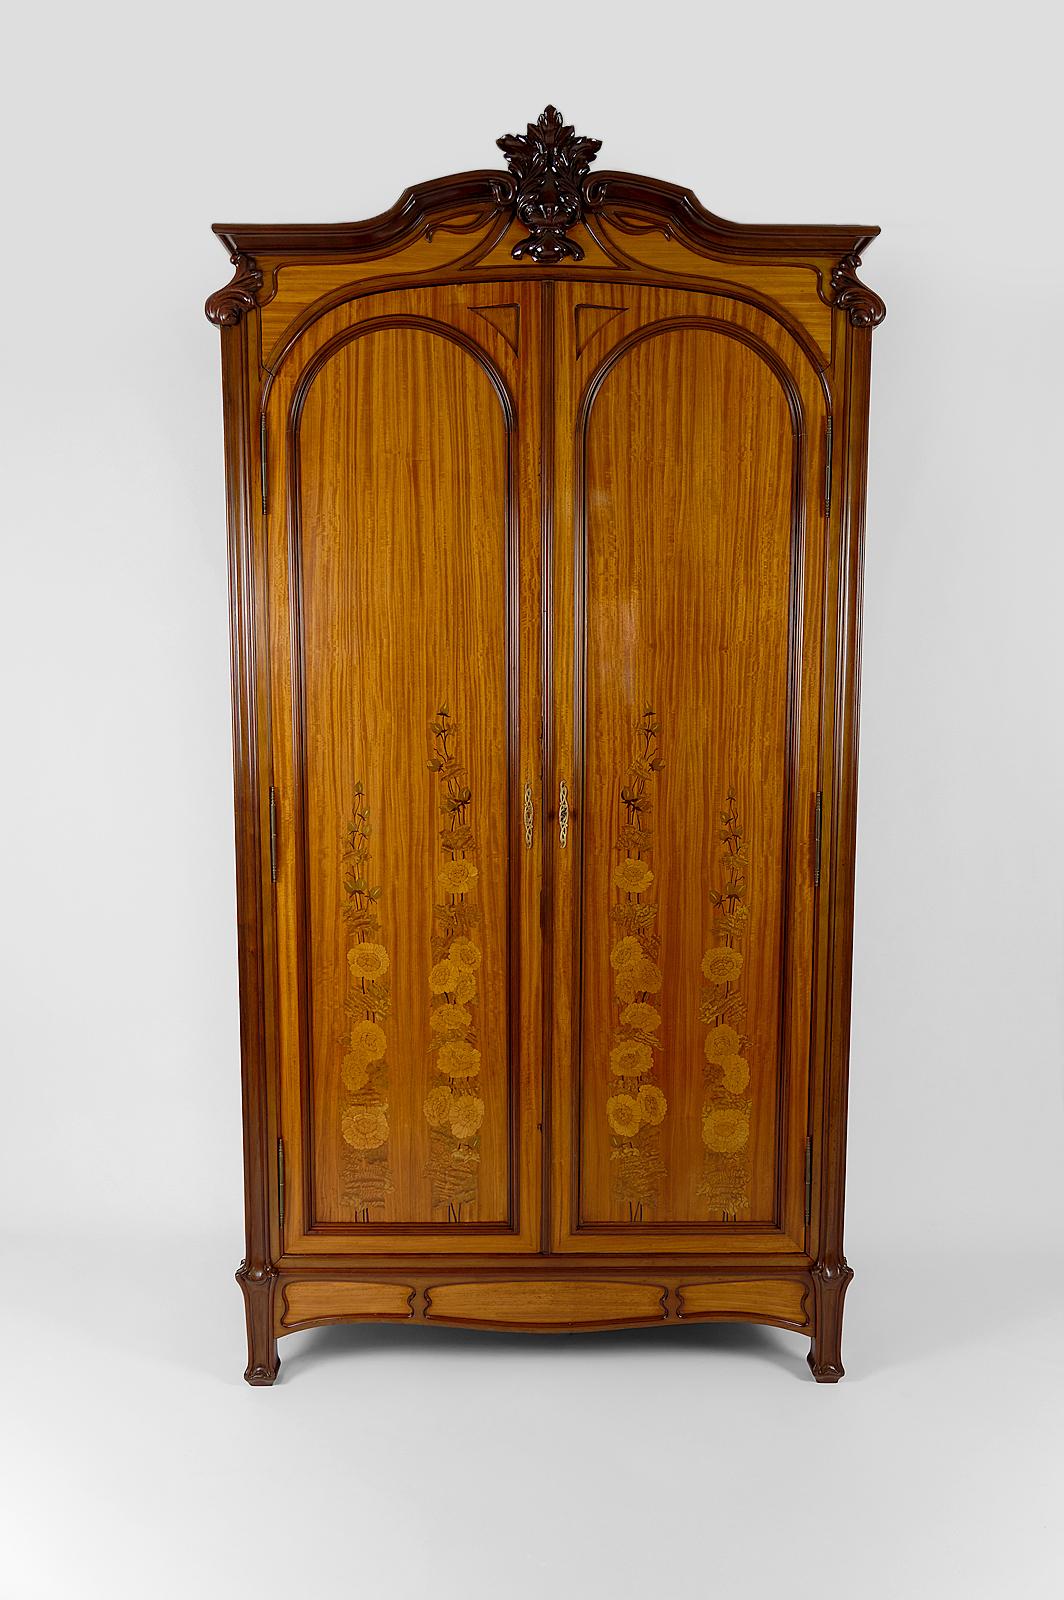 Magnificent mahogany wardrobe with double doors inlaid with flowers. From the Art Nouveau period but some elements such as the pediment recall the Napoleon III style.

Key present, lock OK.

Art Nouveau, France, circa 1890-1900.
In the style of